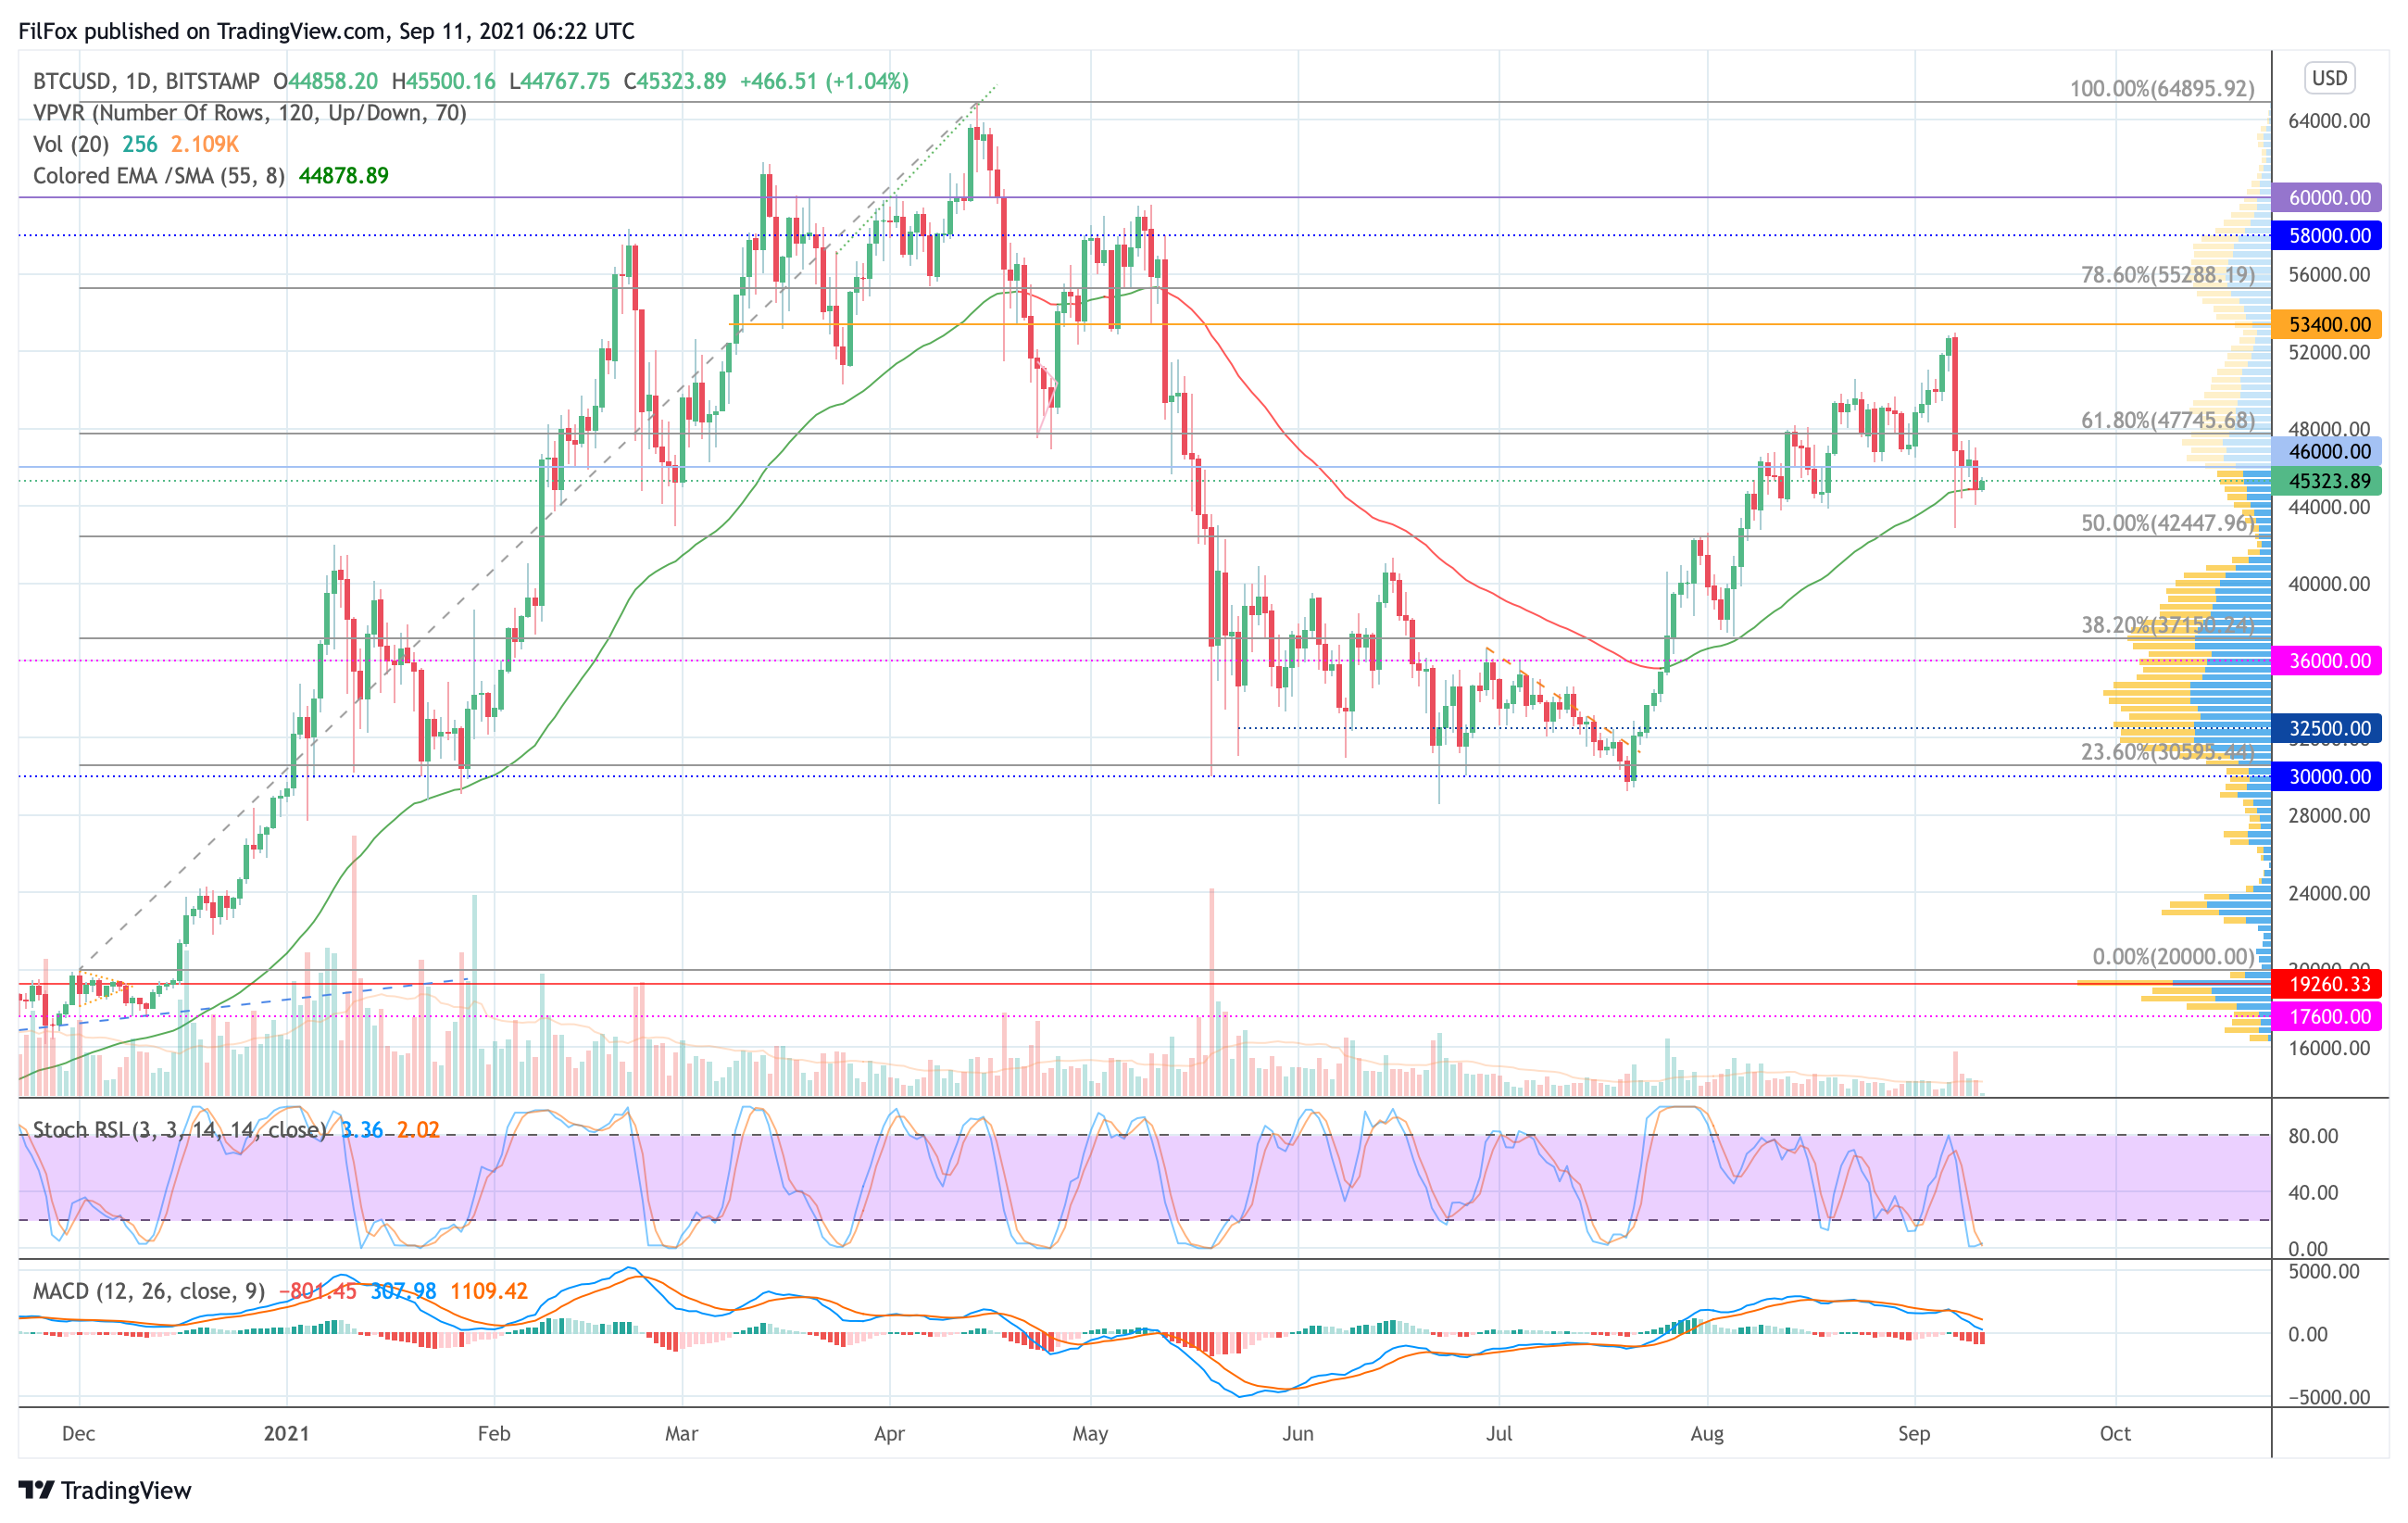 Analysis of the prices of Bitcoin, Ethereum, XRP for 09/11/2021